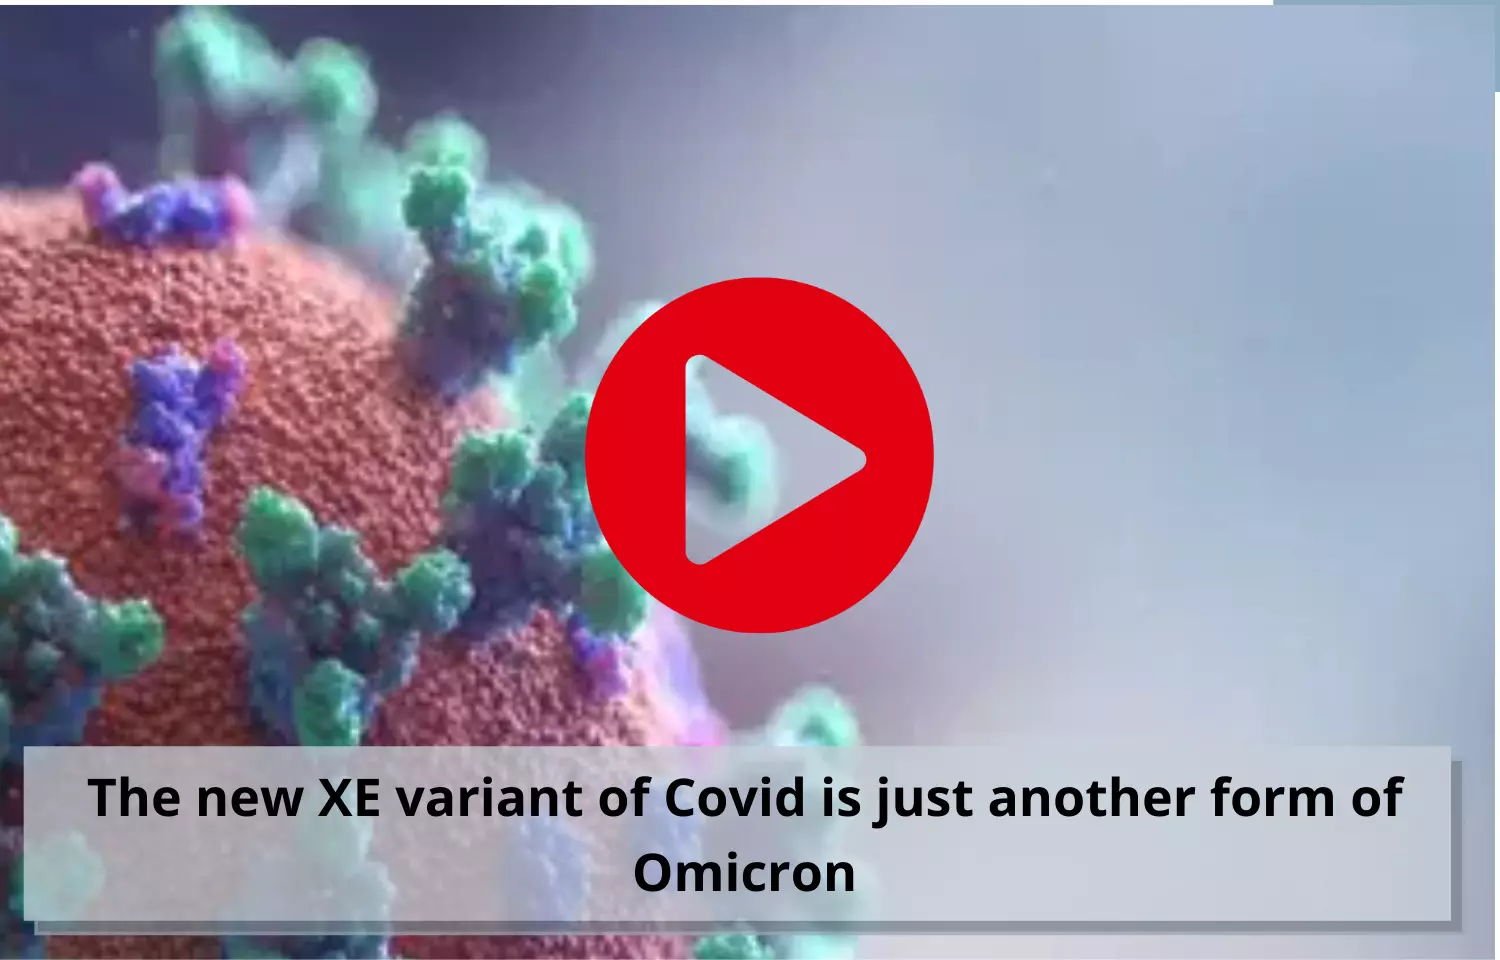 New XE variant of COVID is just another form of Omicron